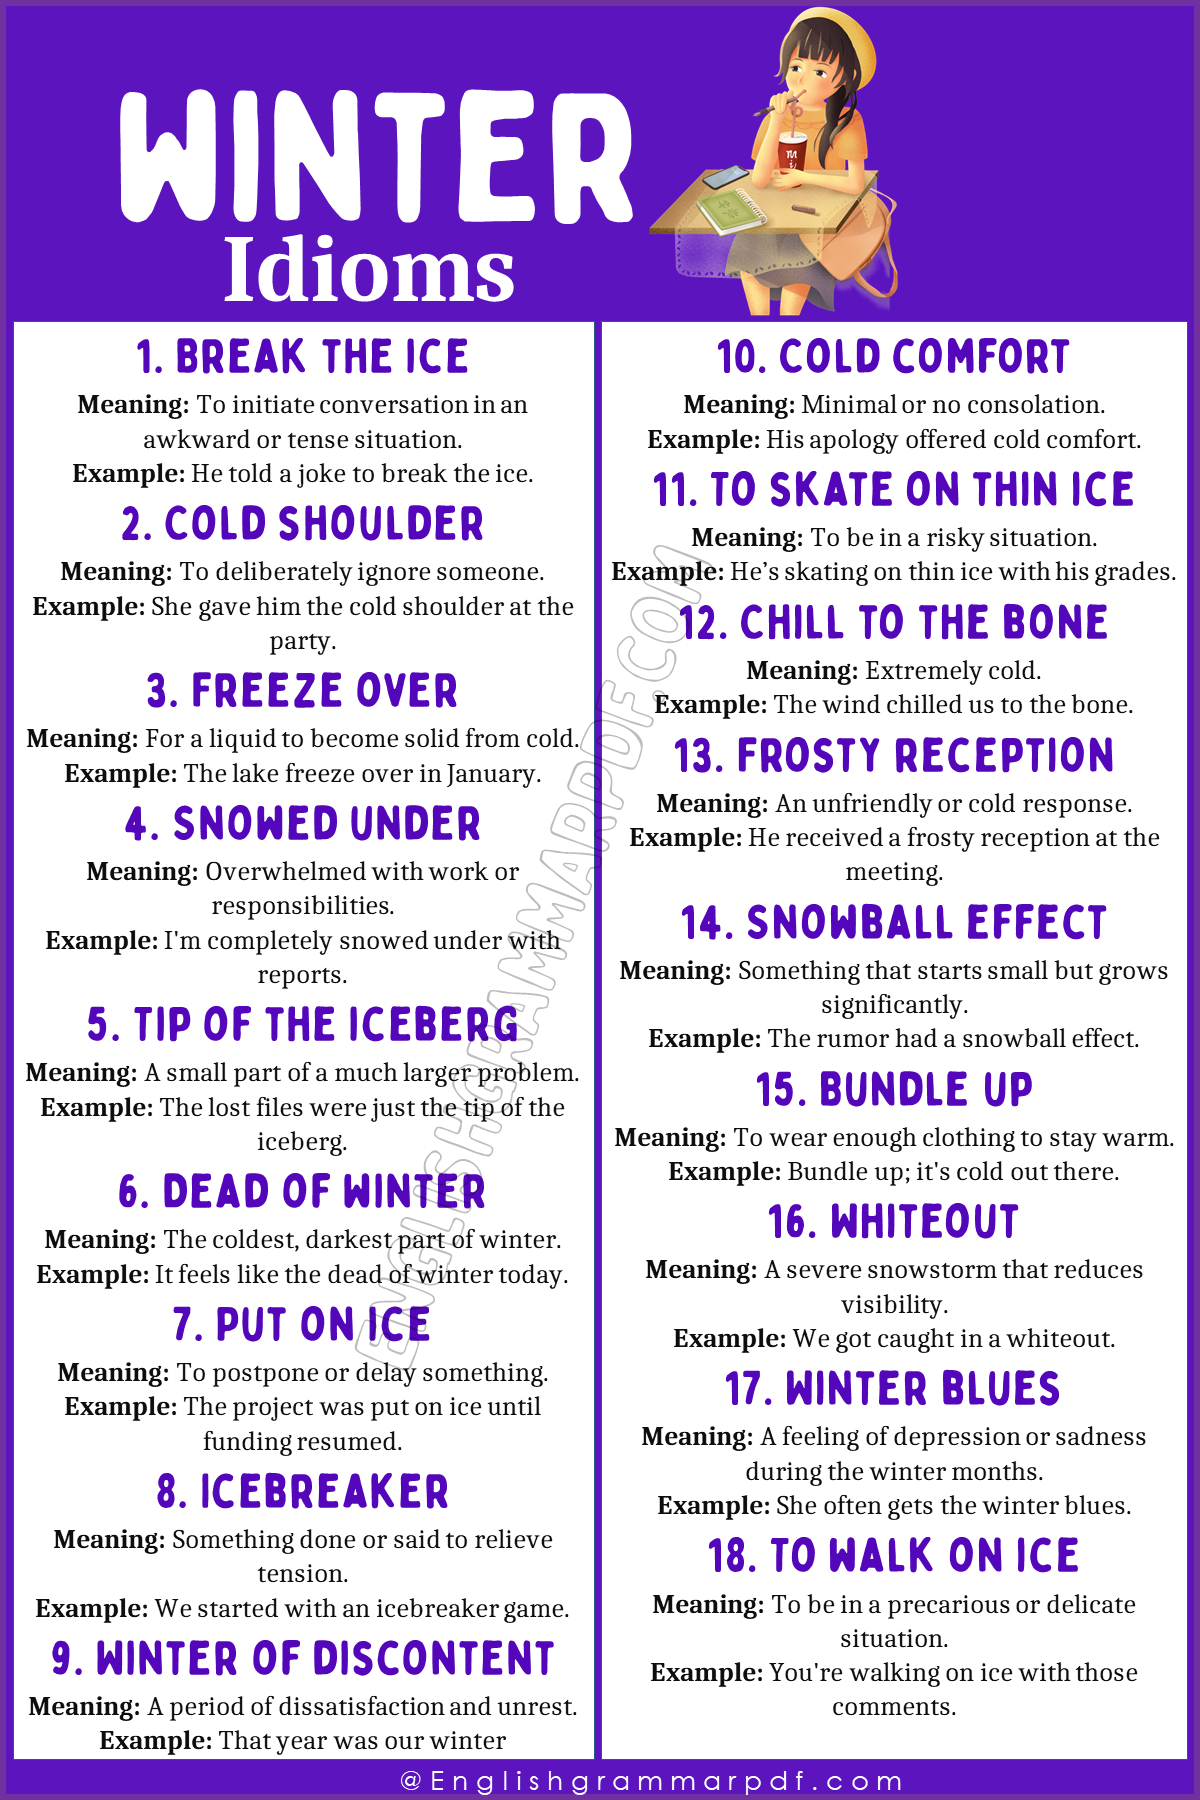 Idioms and Expressions About Winter